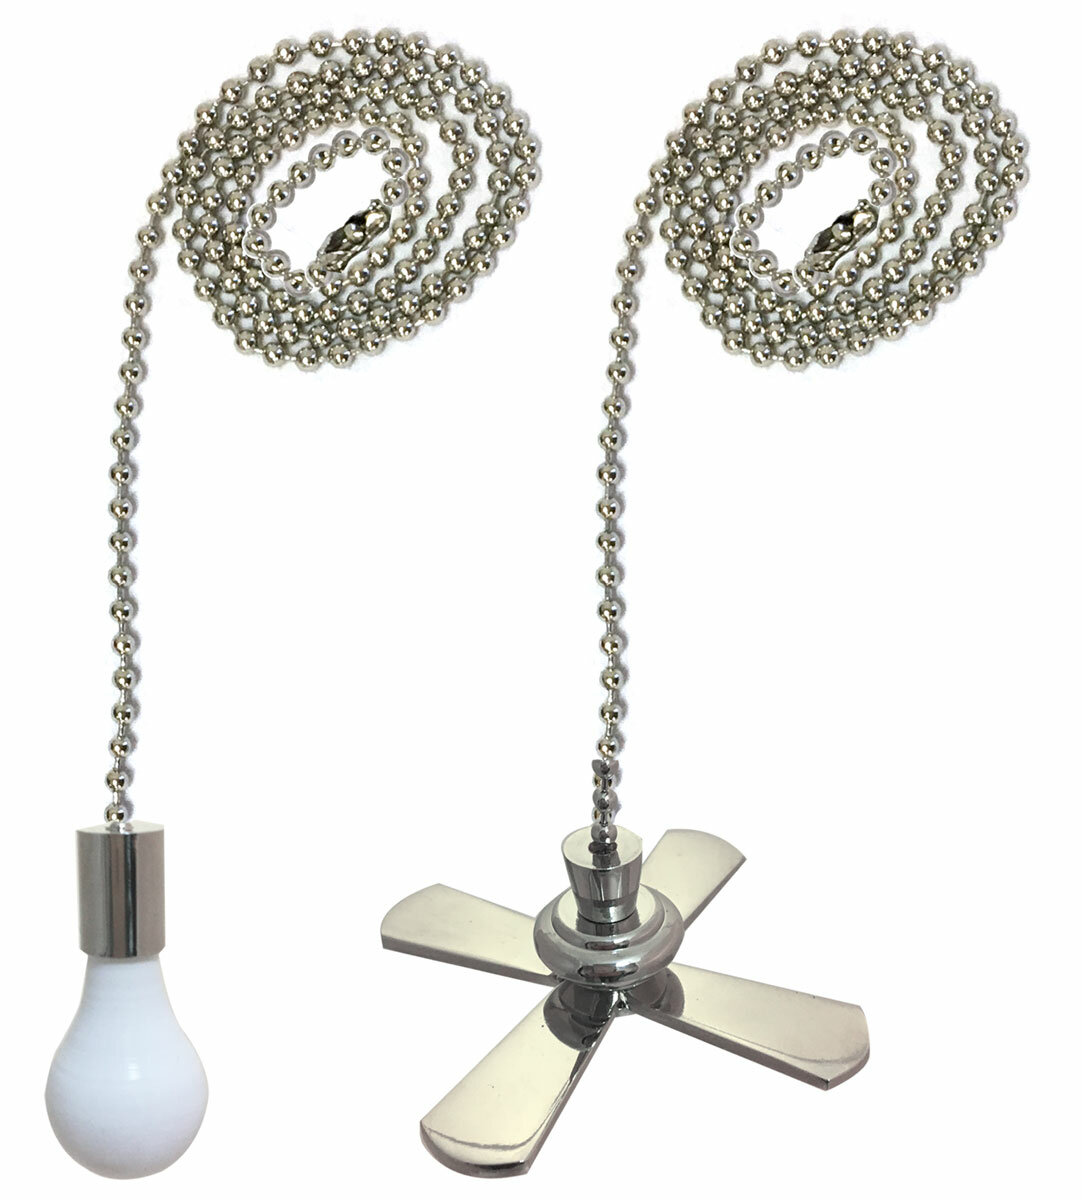 Royal Designs 24 Inch Adjustable Ceiling Fan Pull Chain Extension